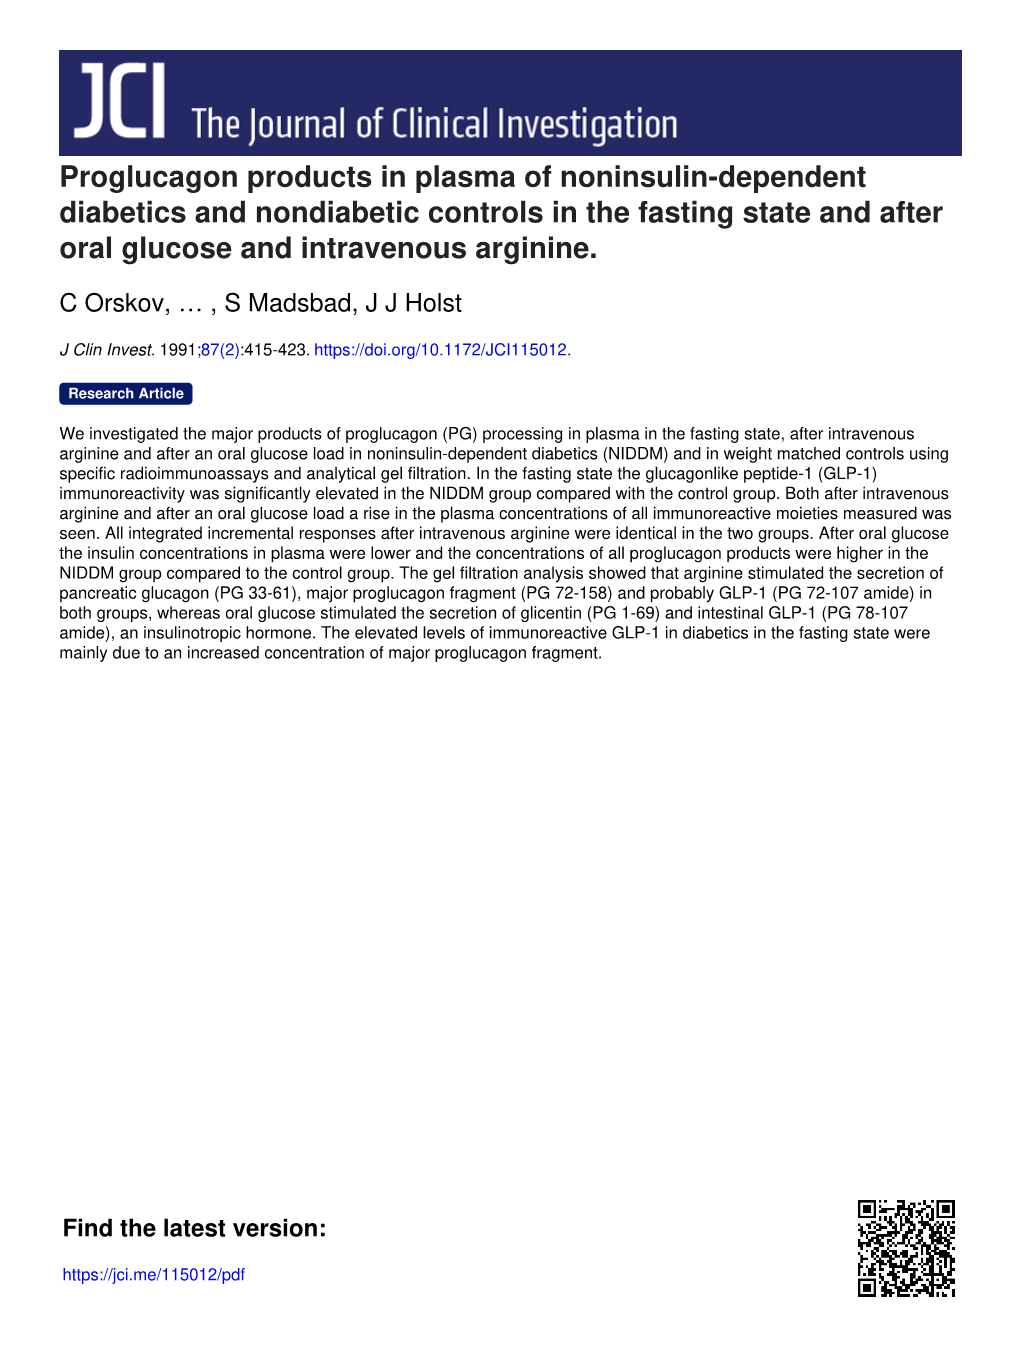 Proglucagon Products in Plasma of Noninsulin-Dependent Diabetics and Nondiabetic Controls in the Fasting State and After Oral Glucose and Intravenous Arginine